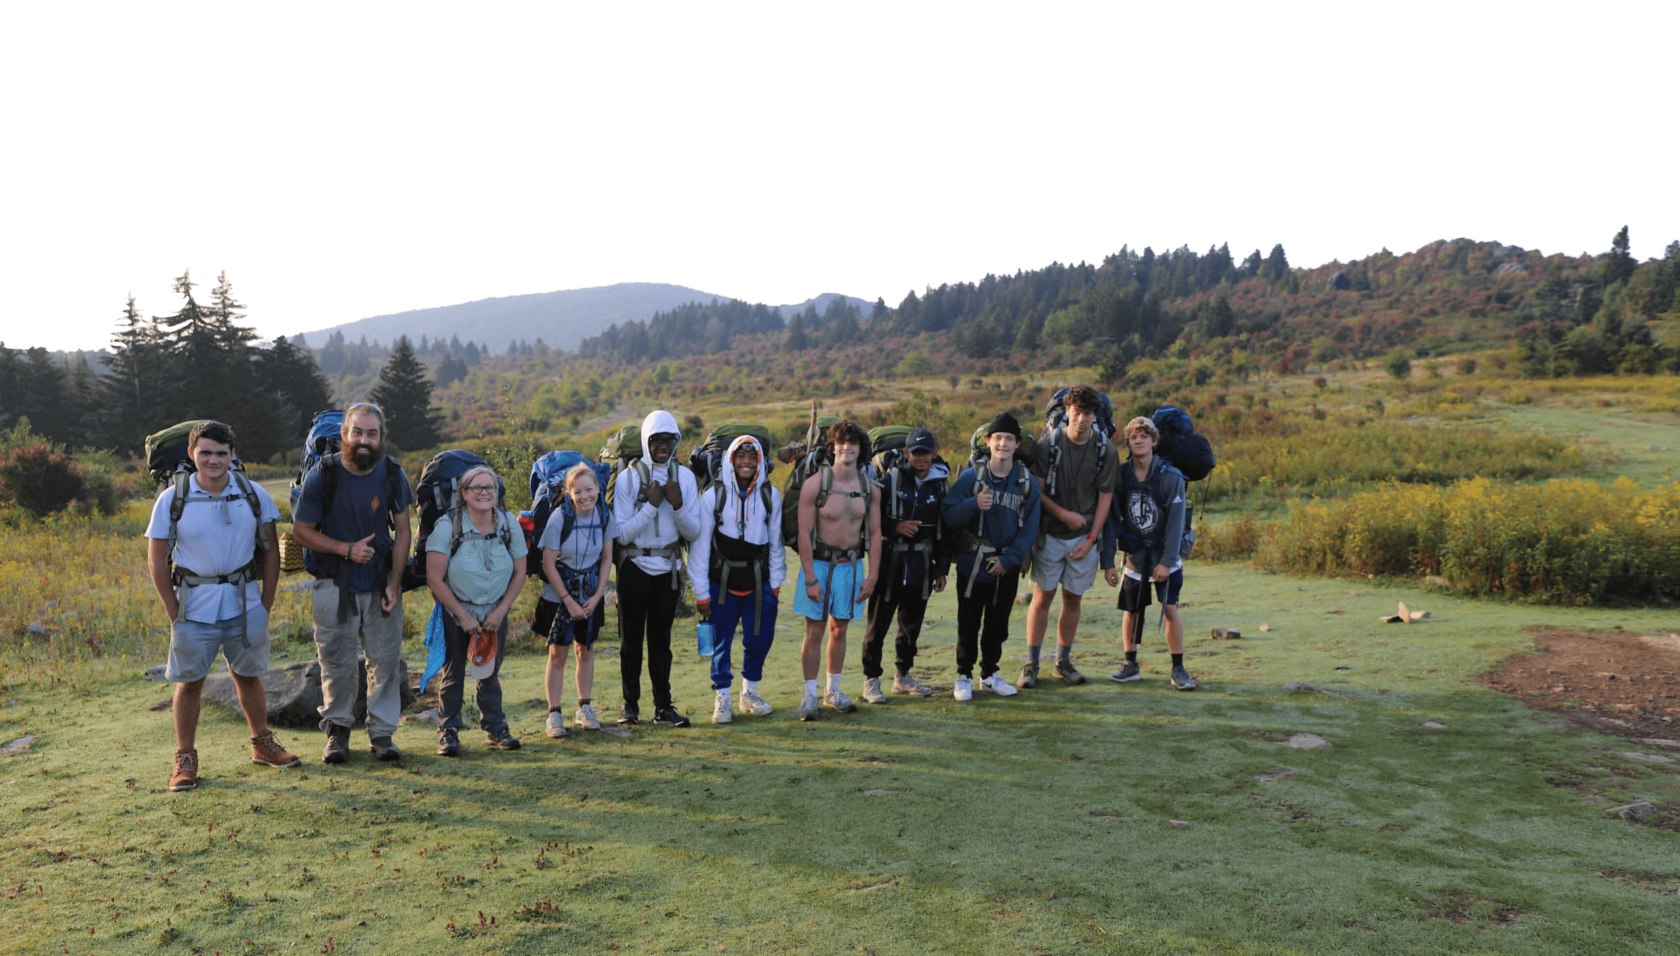 A group of teenagers ready for backpacking.